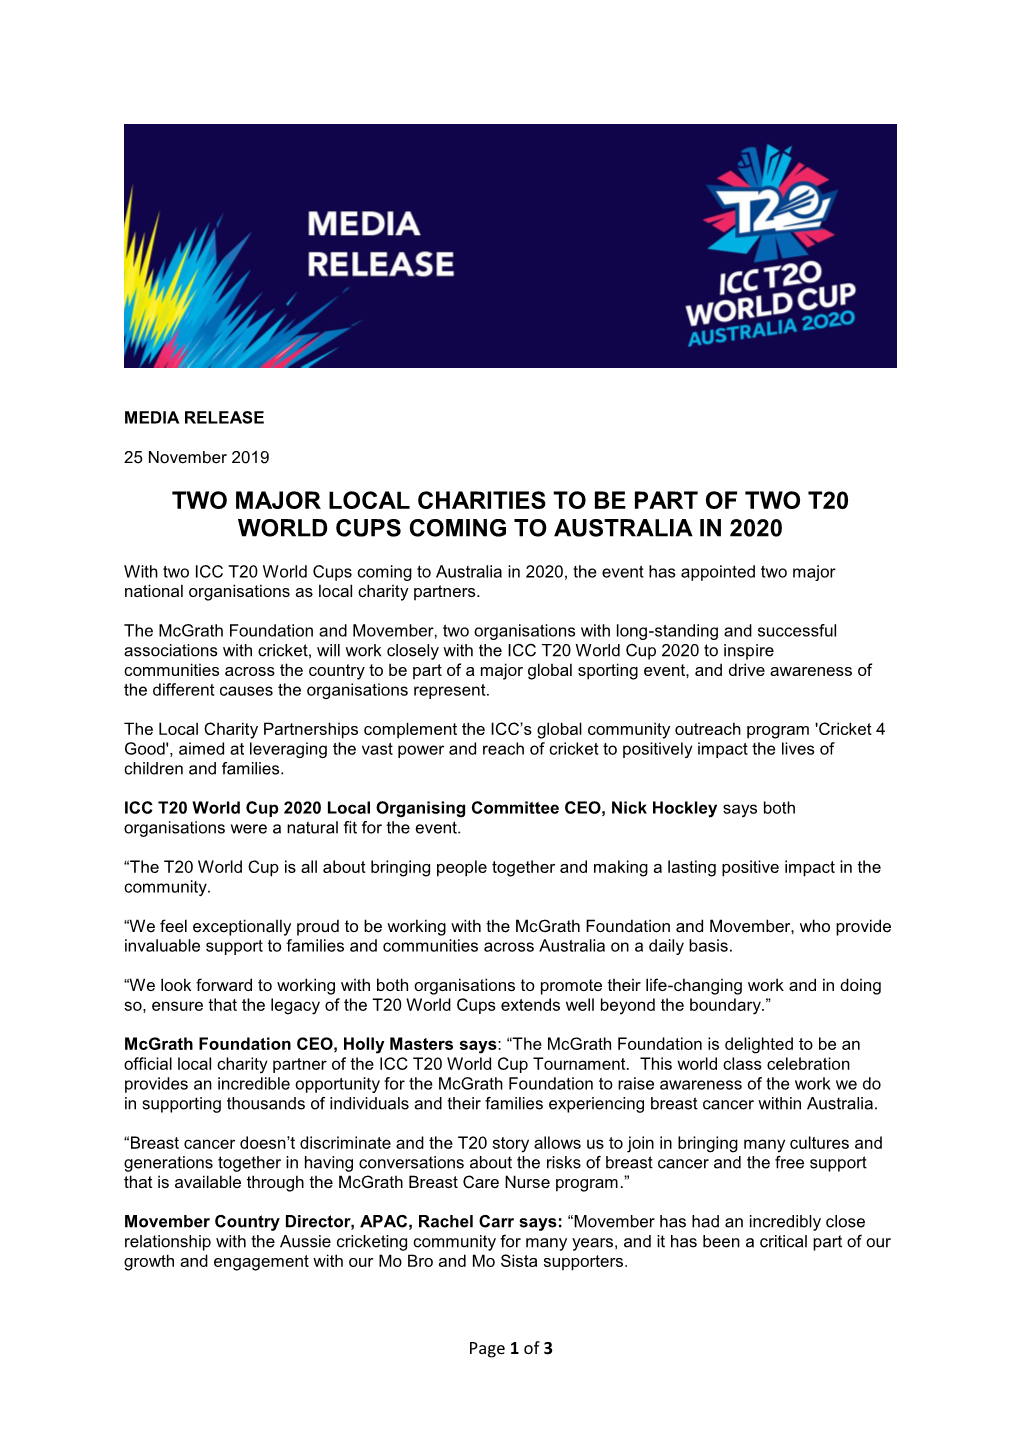 Two Major Local Charities to Be Part of Two T20 World Cups Coming to Australia in 2020